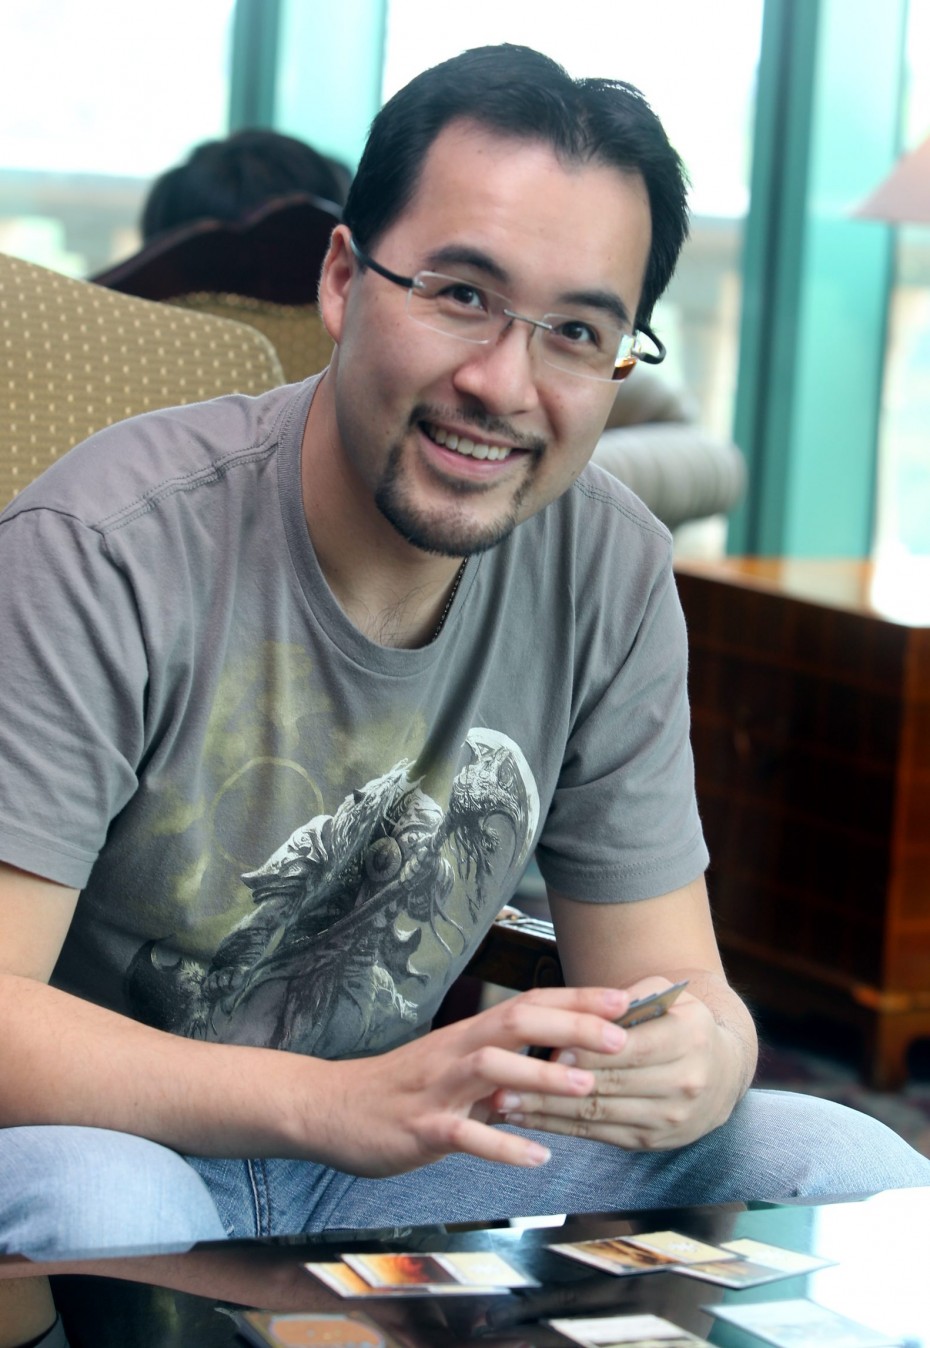 Asia Pacific senior brand manager for Wizards of the Coast, Wilkin Chan, believes the strong structured programme the company has adopted for Magic is responsible for keeping the game going over the years.